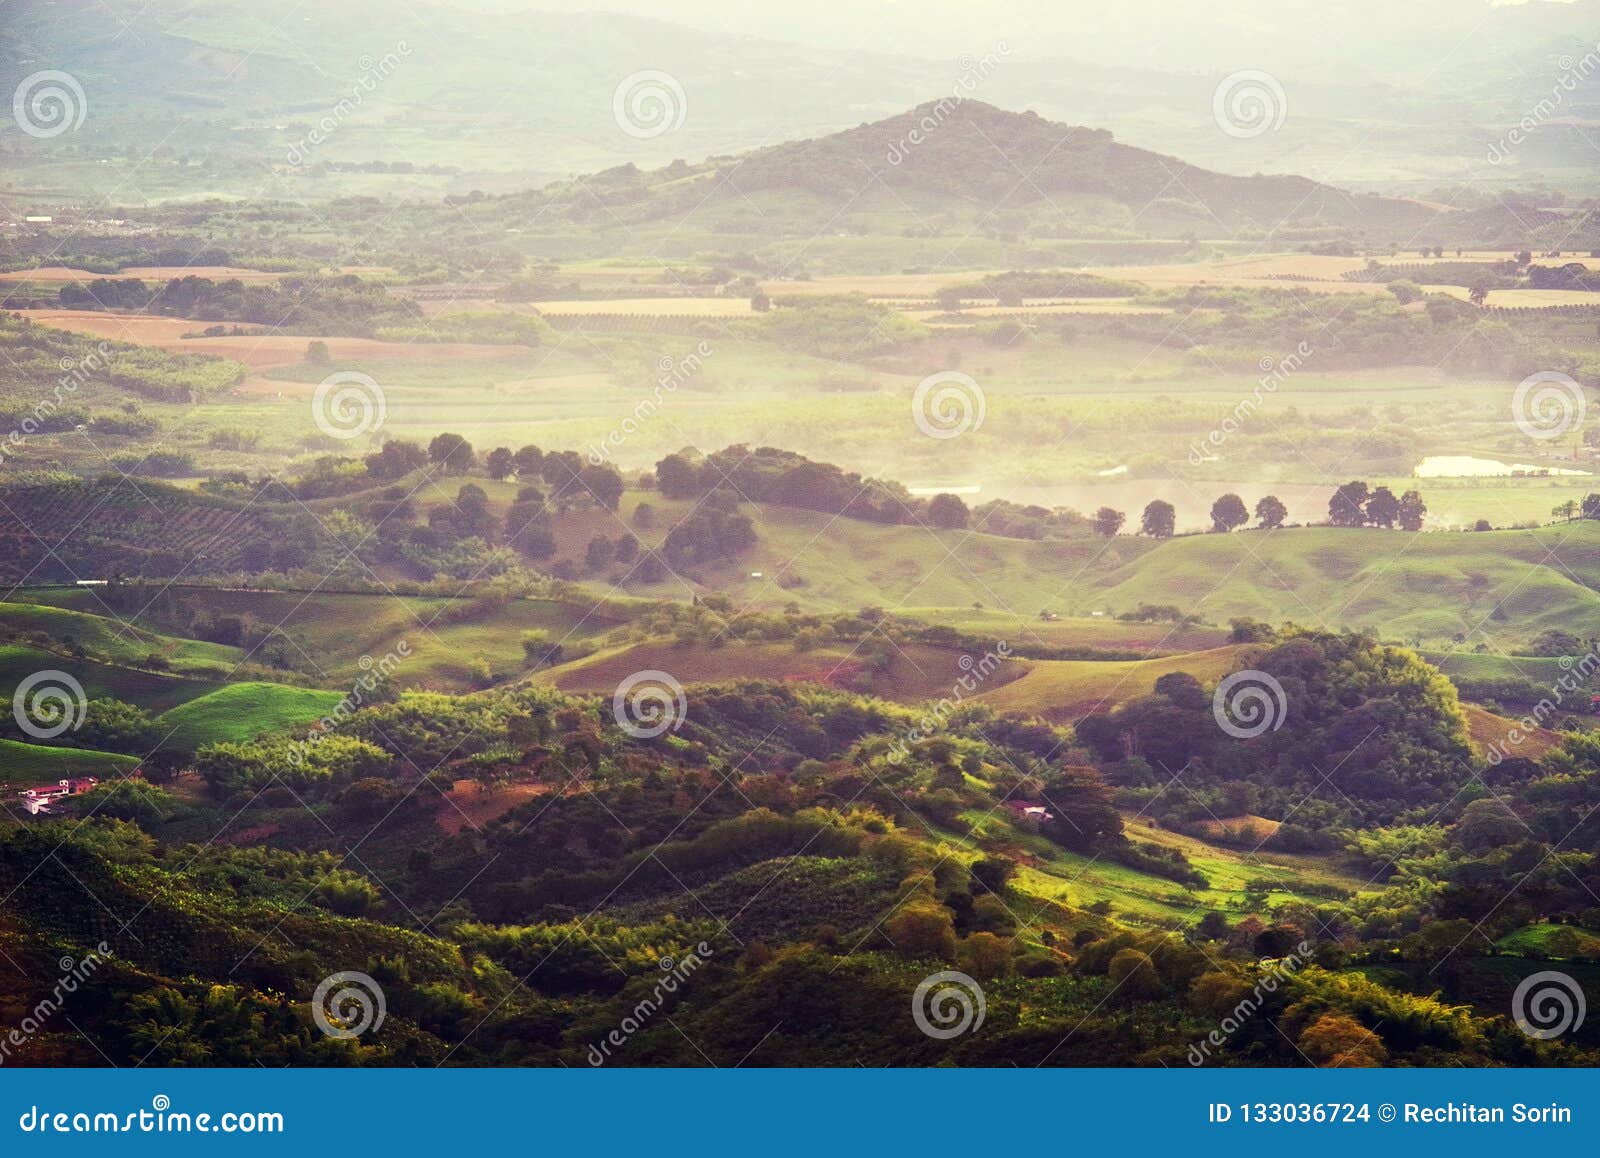 foggy landscape of the hills covered in coffee and banana plantations near buenavista